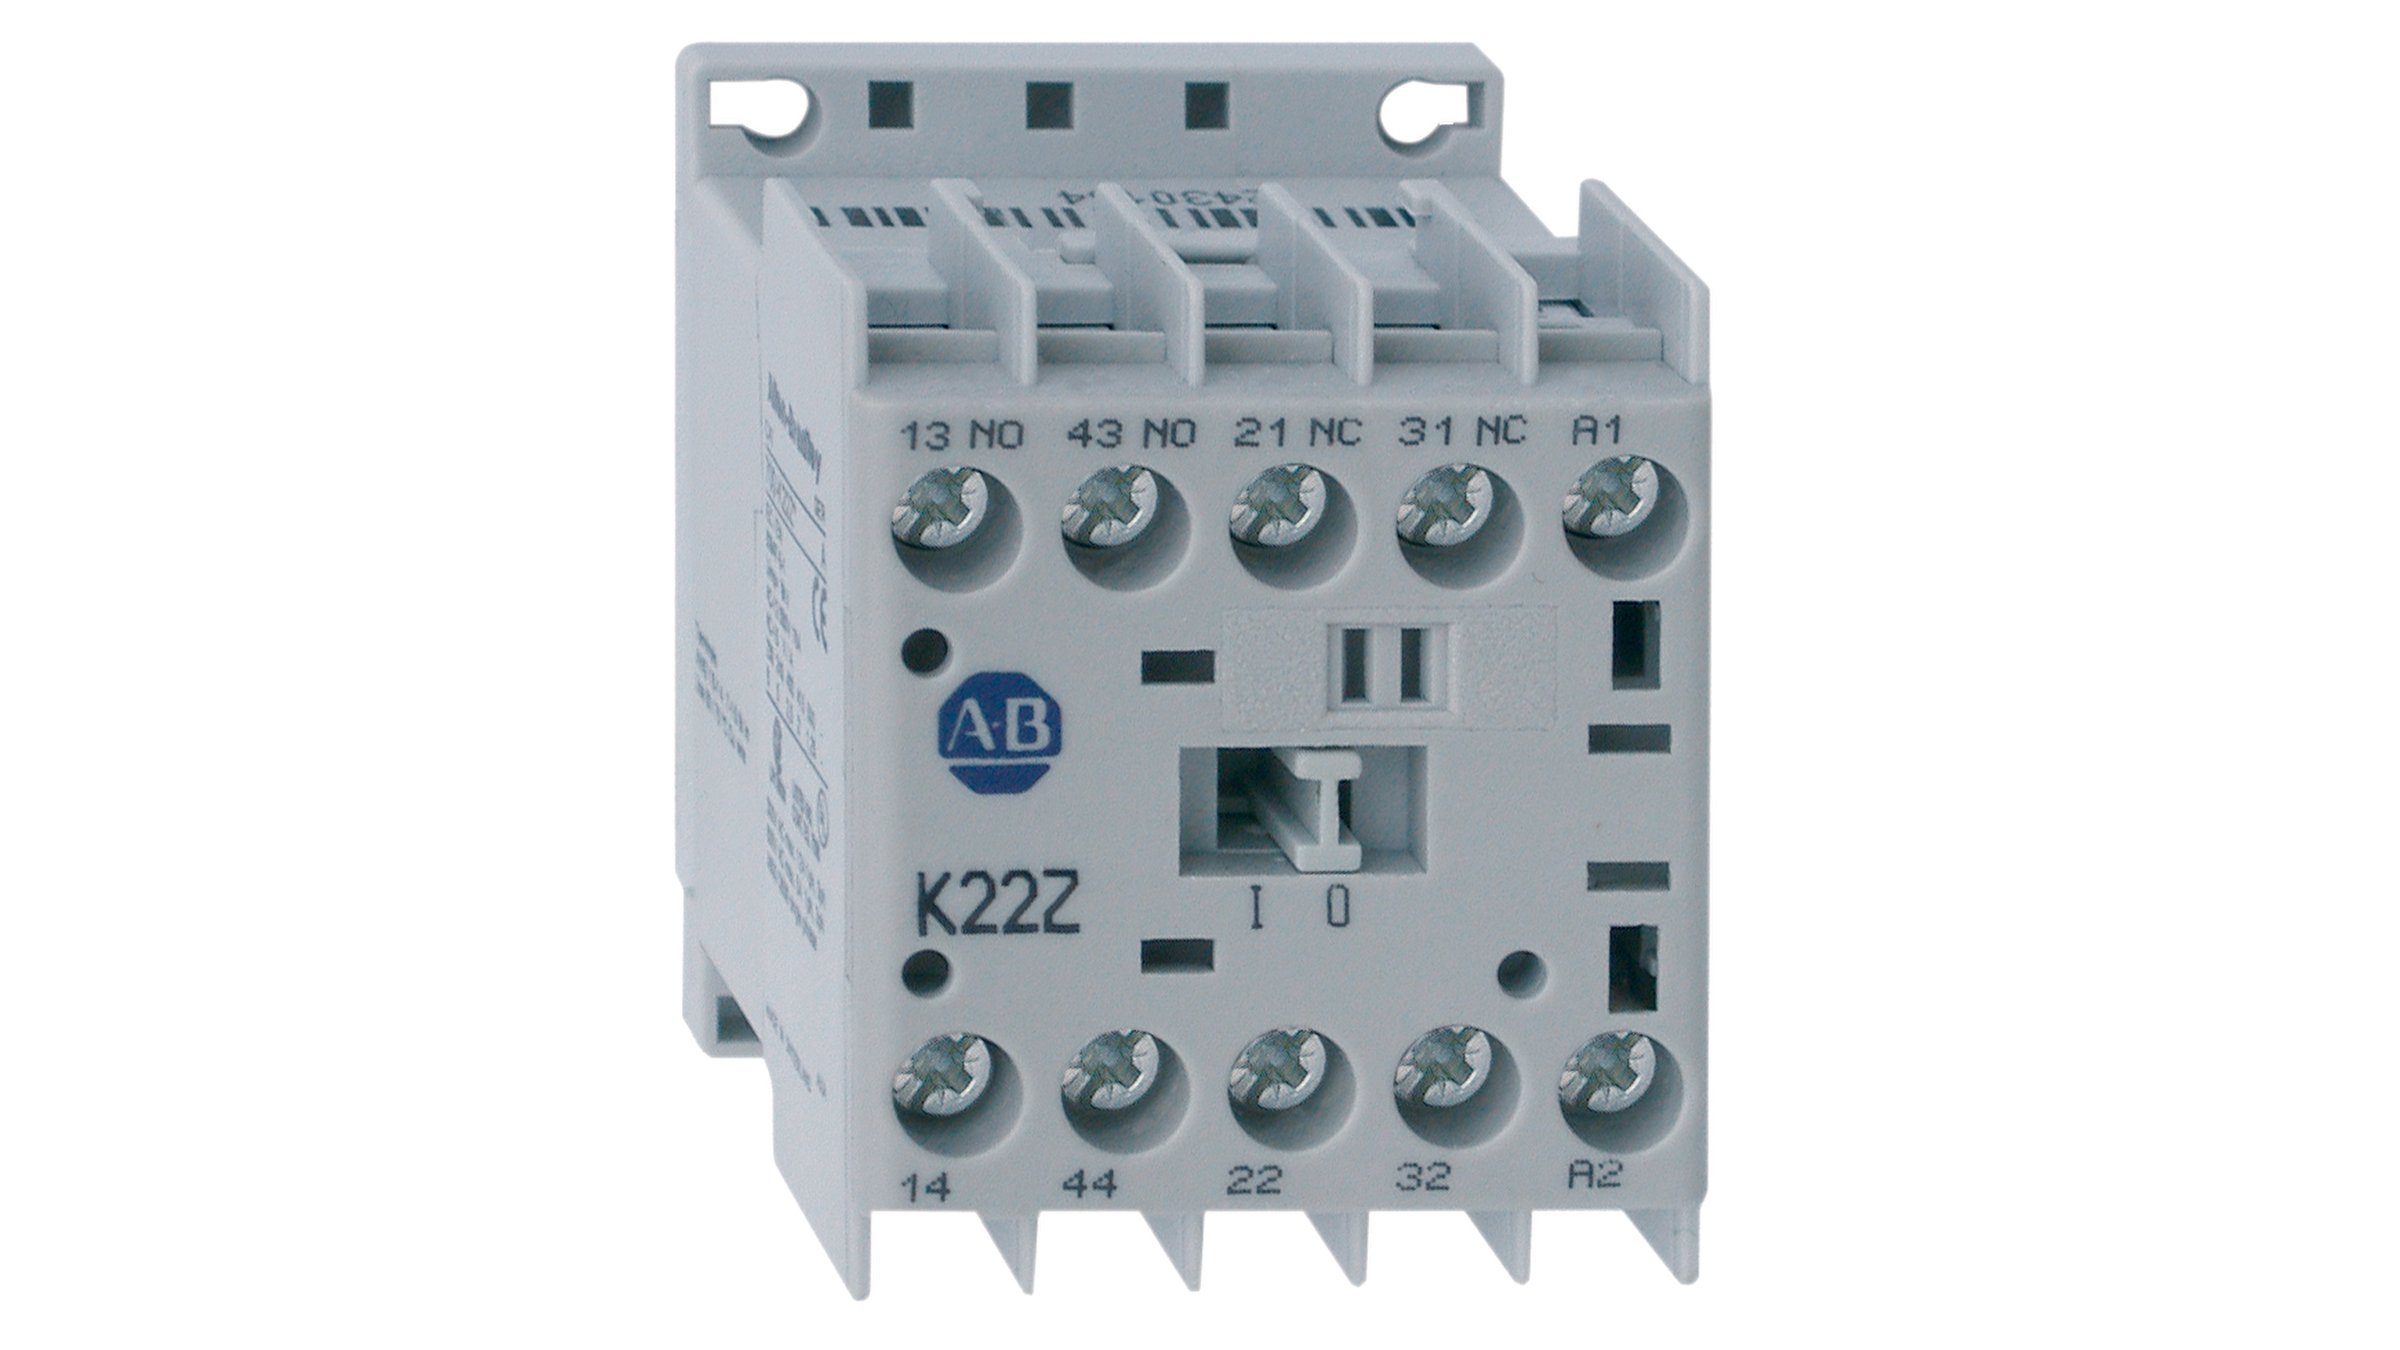 Allen-Bradley Bulletin 700-K IEC Control Relays are compact sized industrial relays capable of switching low-energy signals.